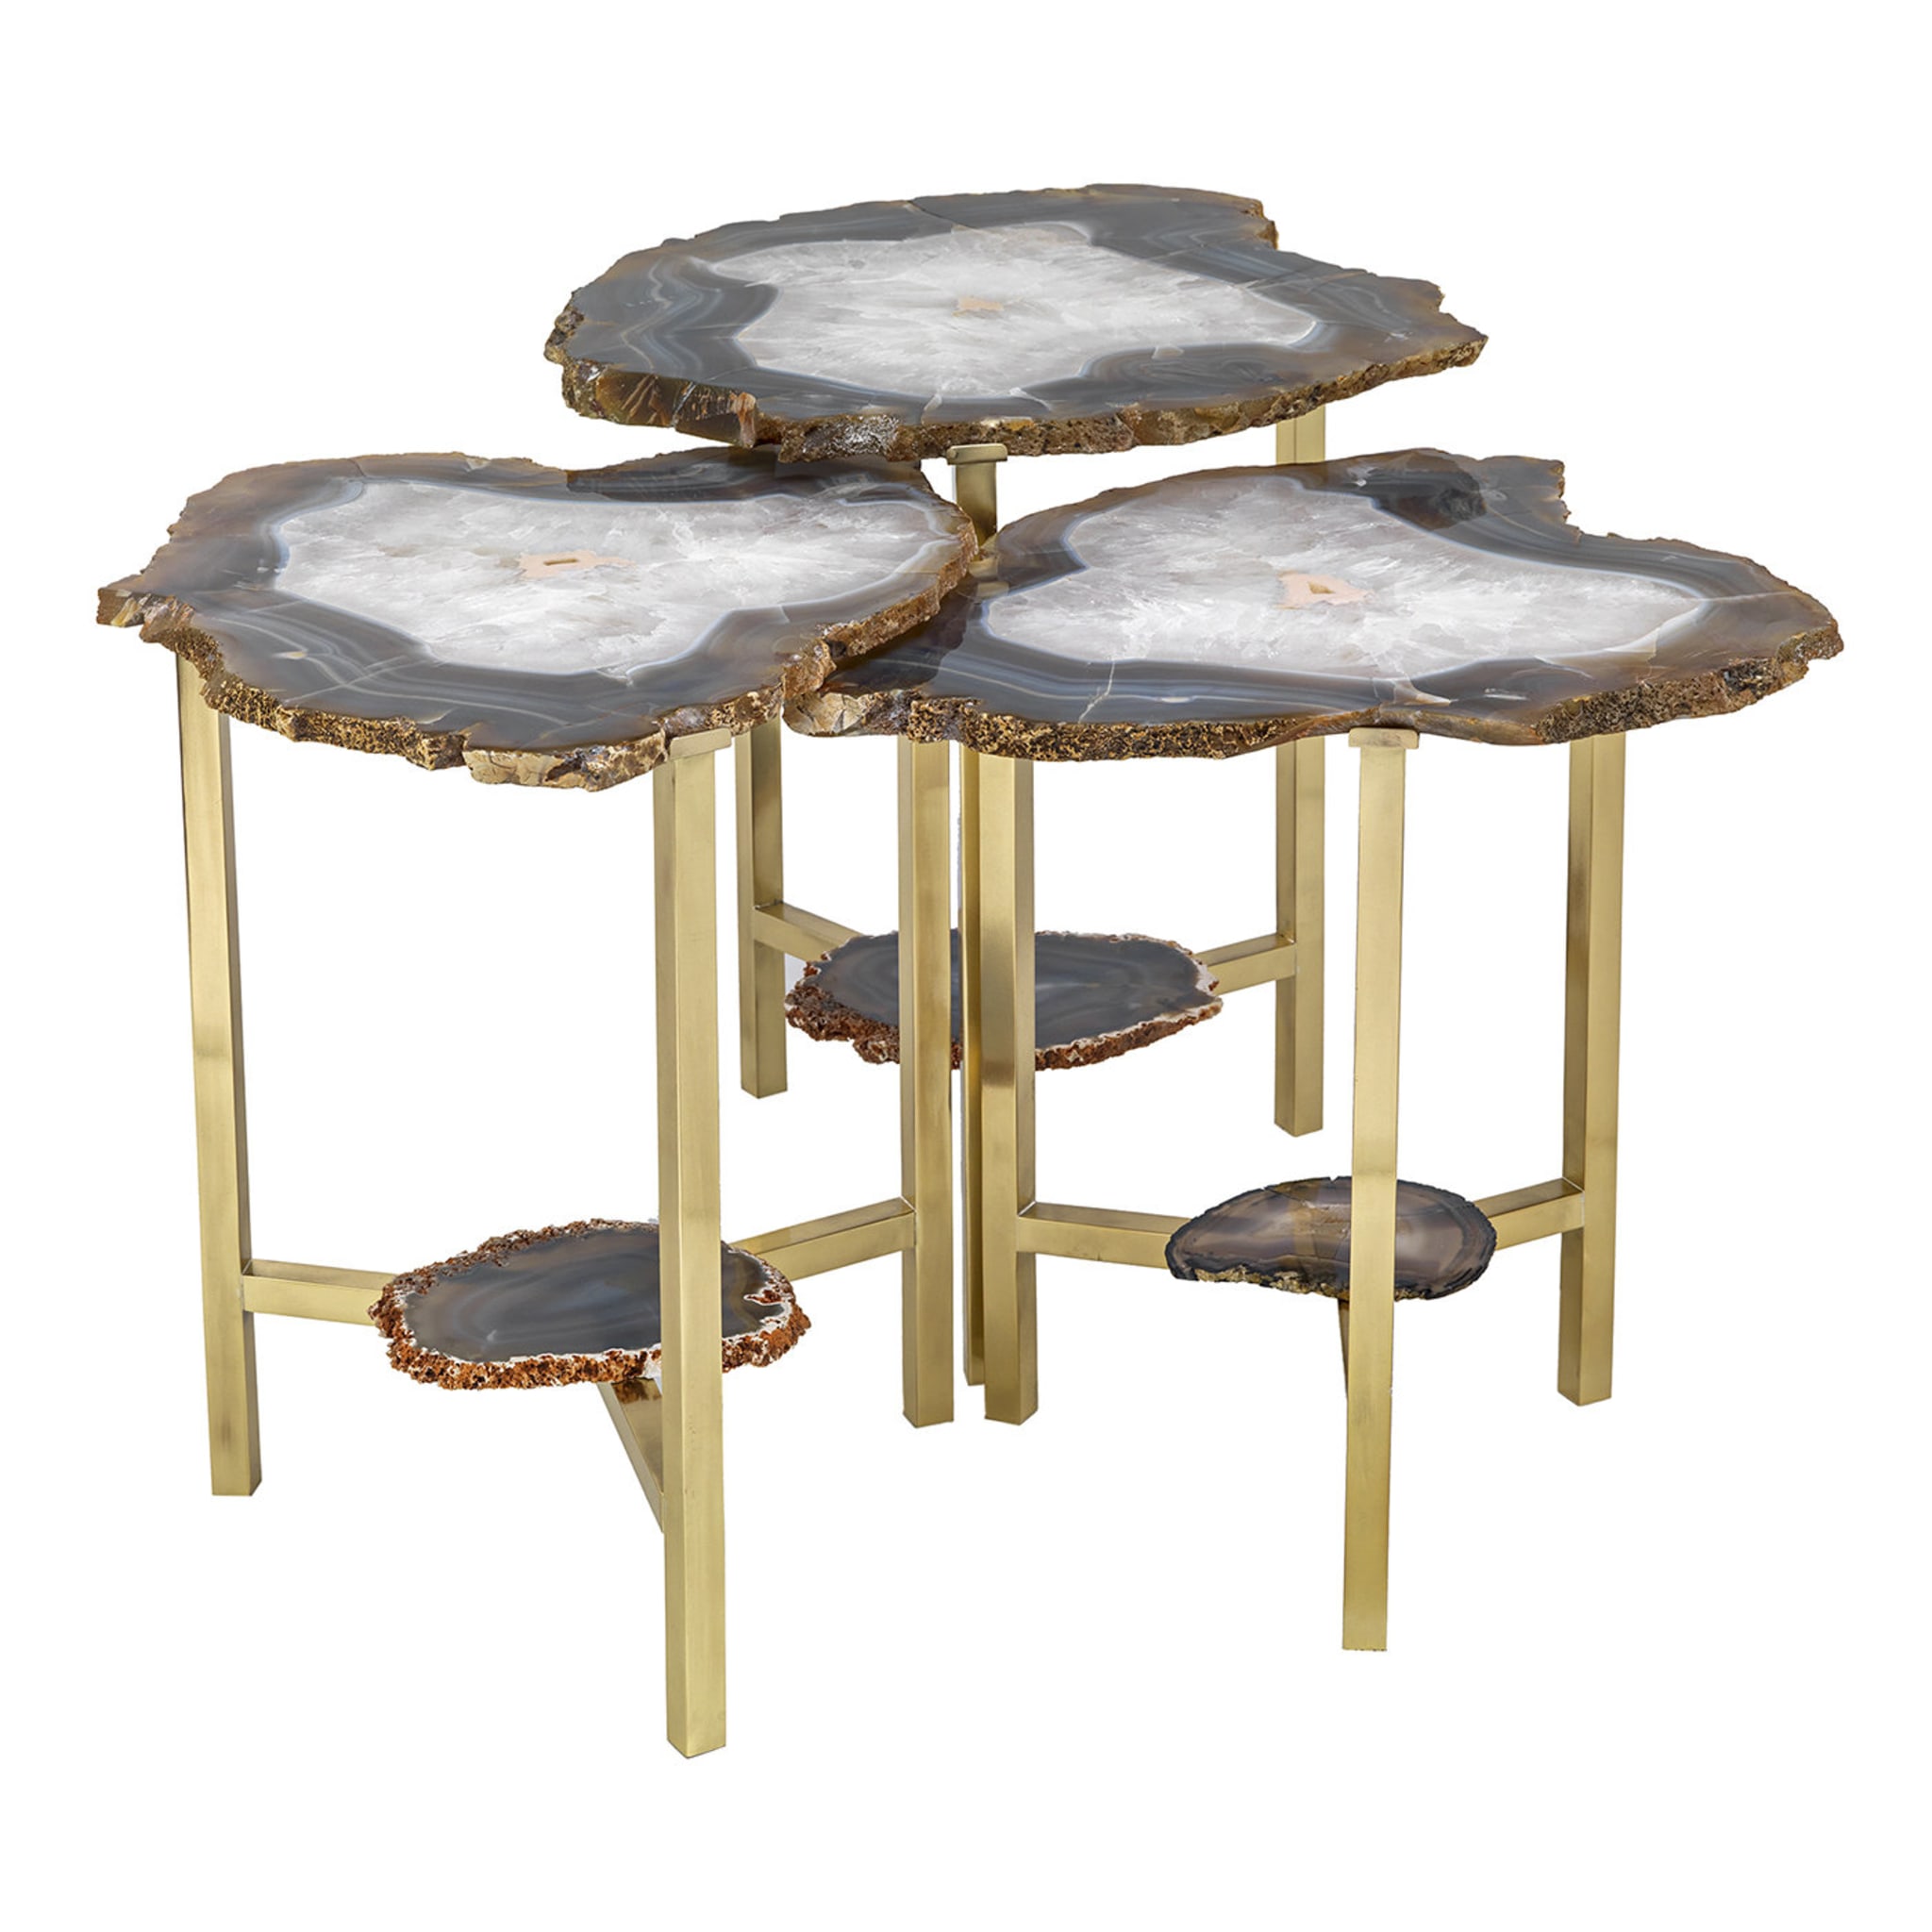 Agata Set of 3 Nesting Tables - Main view